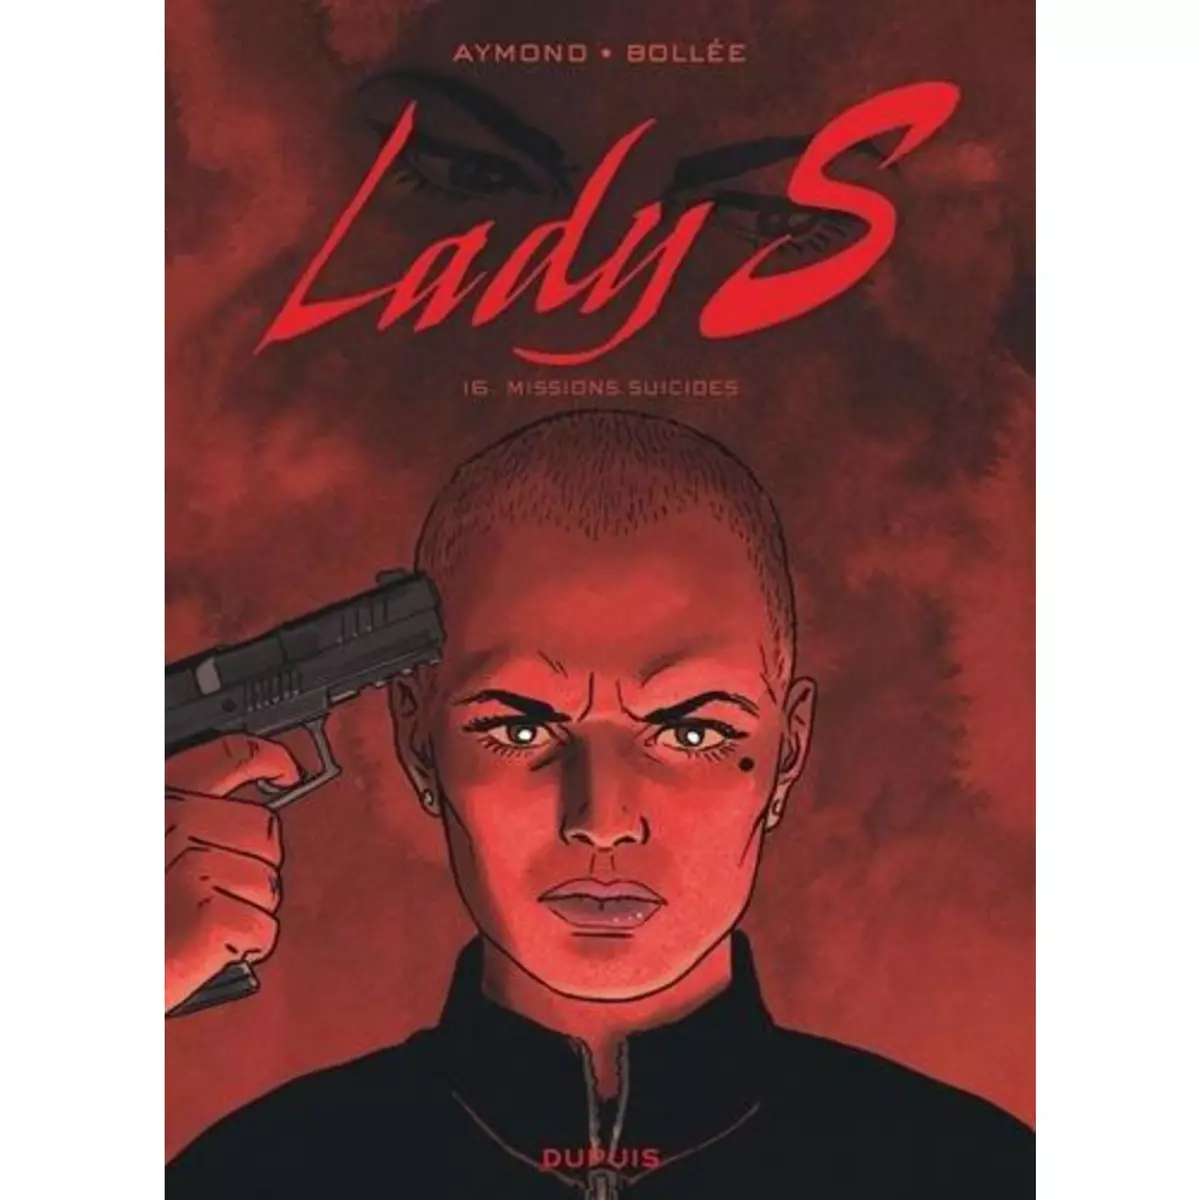  LADY S TOME 16 : MISSIONS SUICIDES, Aymond Philippe